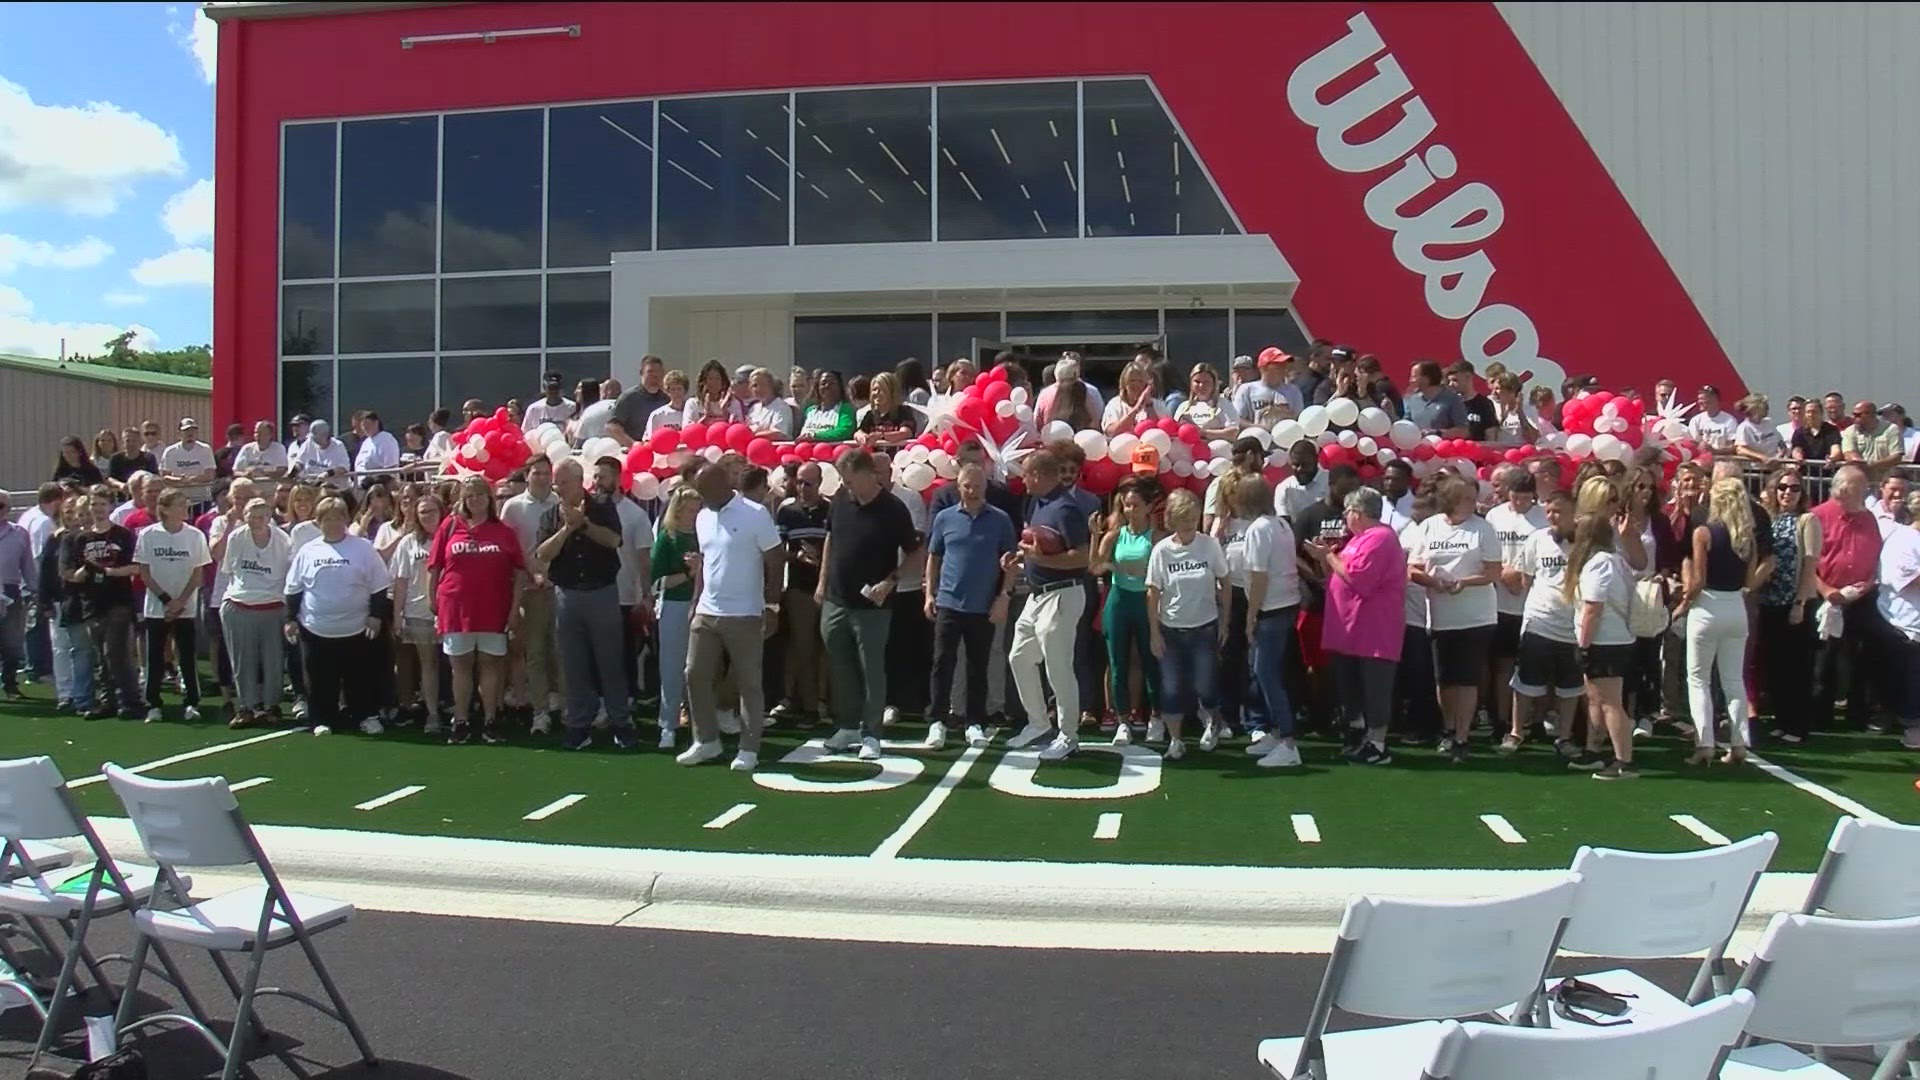 The longstanding facility in Ada, responsible for making the footballs used by the National Football League, underwent a $15M expansion and nearly doubled in size.